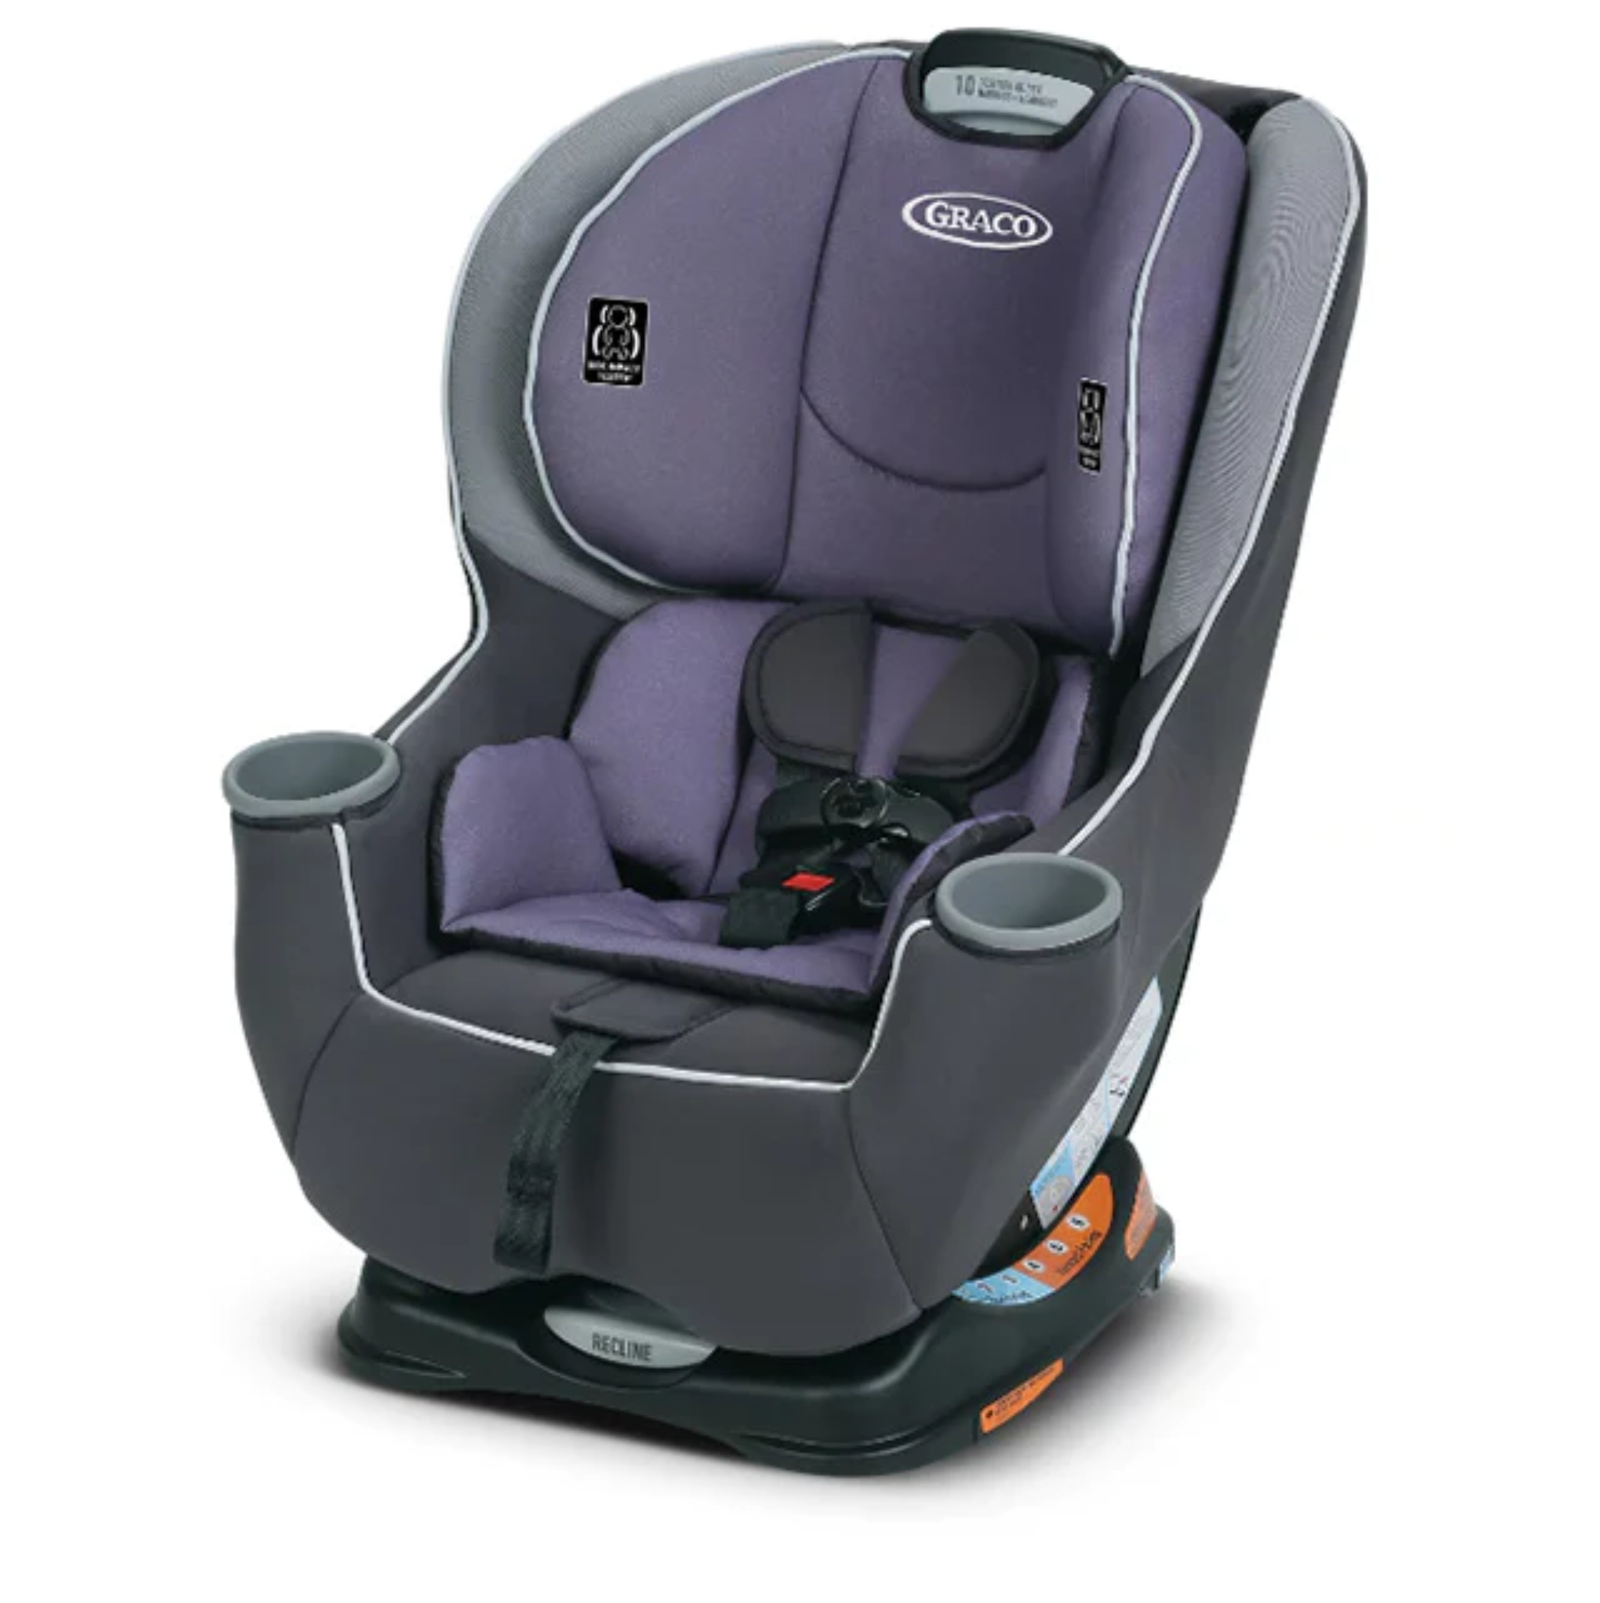 ASIENTO INFANTIL GRACO SEQUENCE 65 ANABELE RN-30KG - Shopping del niño